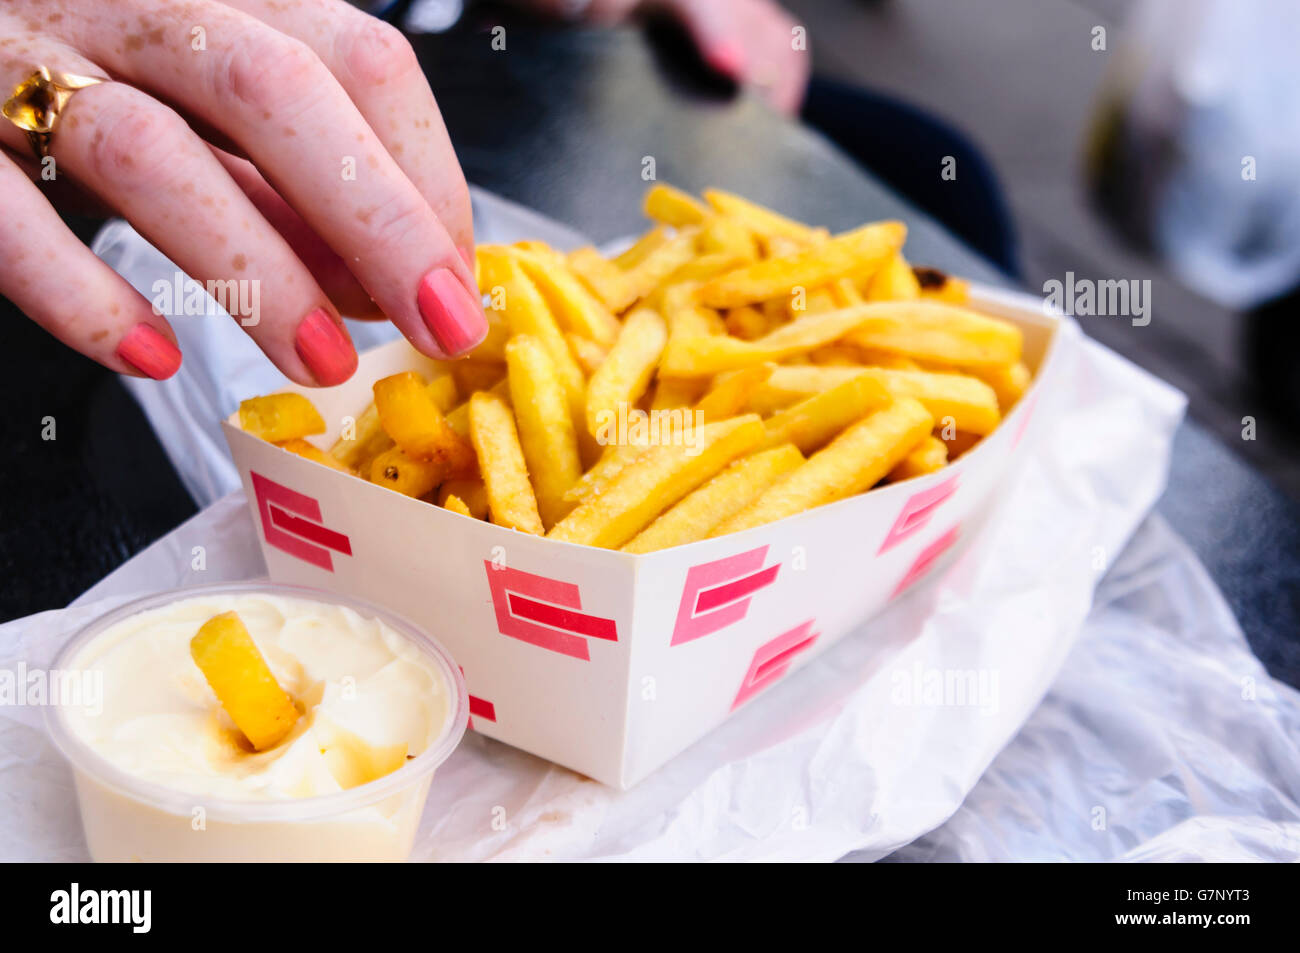 A woman takes a fry from a box of French Fries beside a tub of mayonnaise. Stock Photo